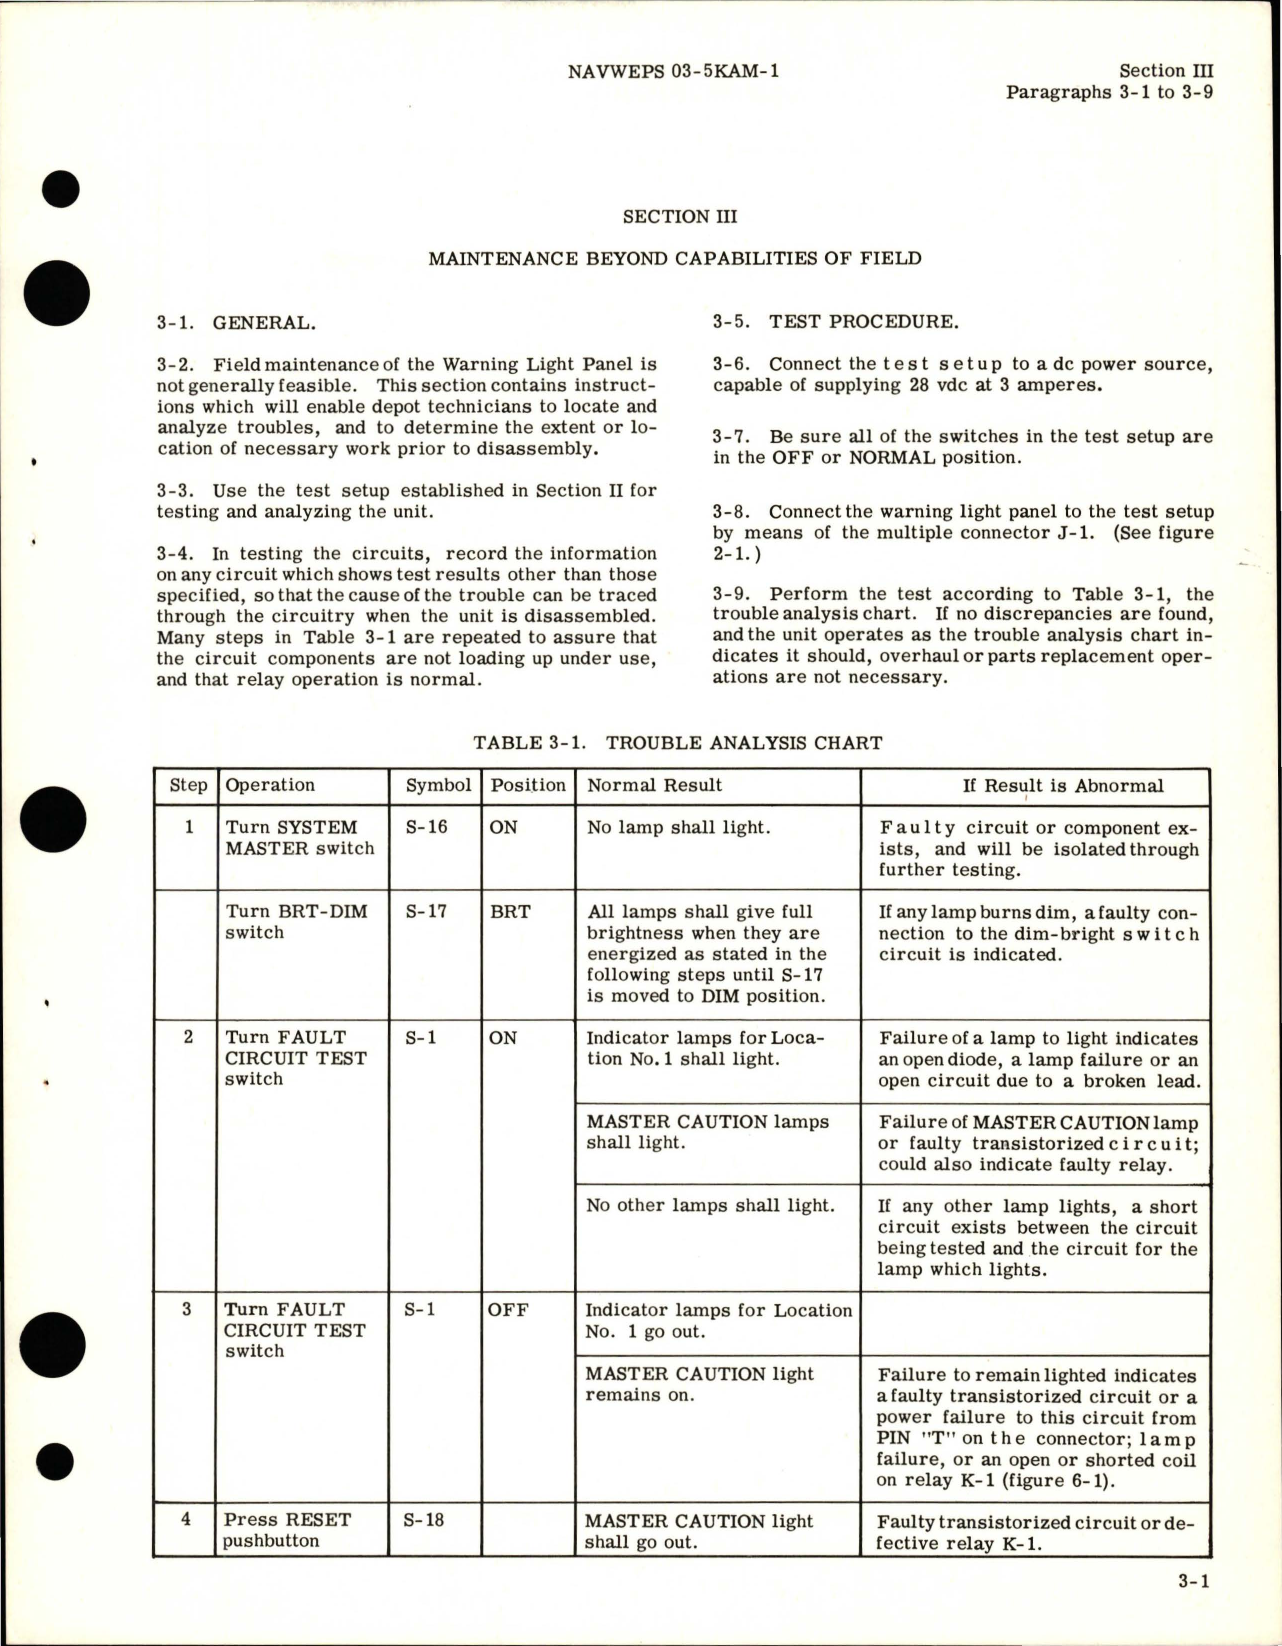 Sample page 9 from AirCorps Library document: Overhaul Instructions for Warning Light Panel - Parts 41070 and 41070A-1